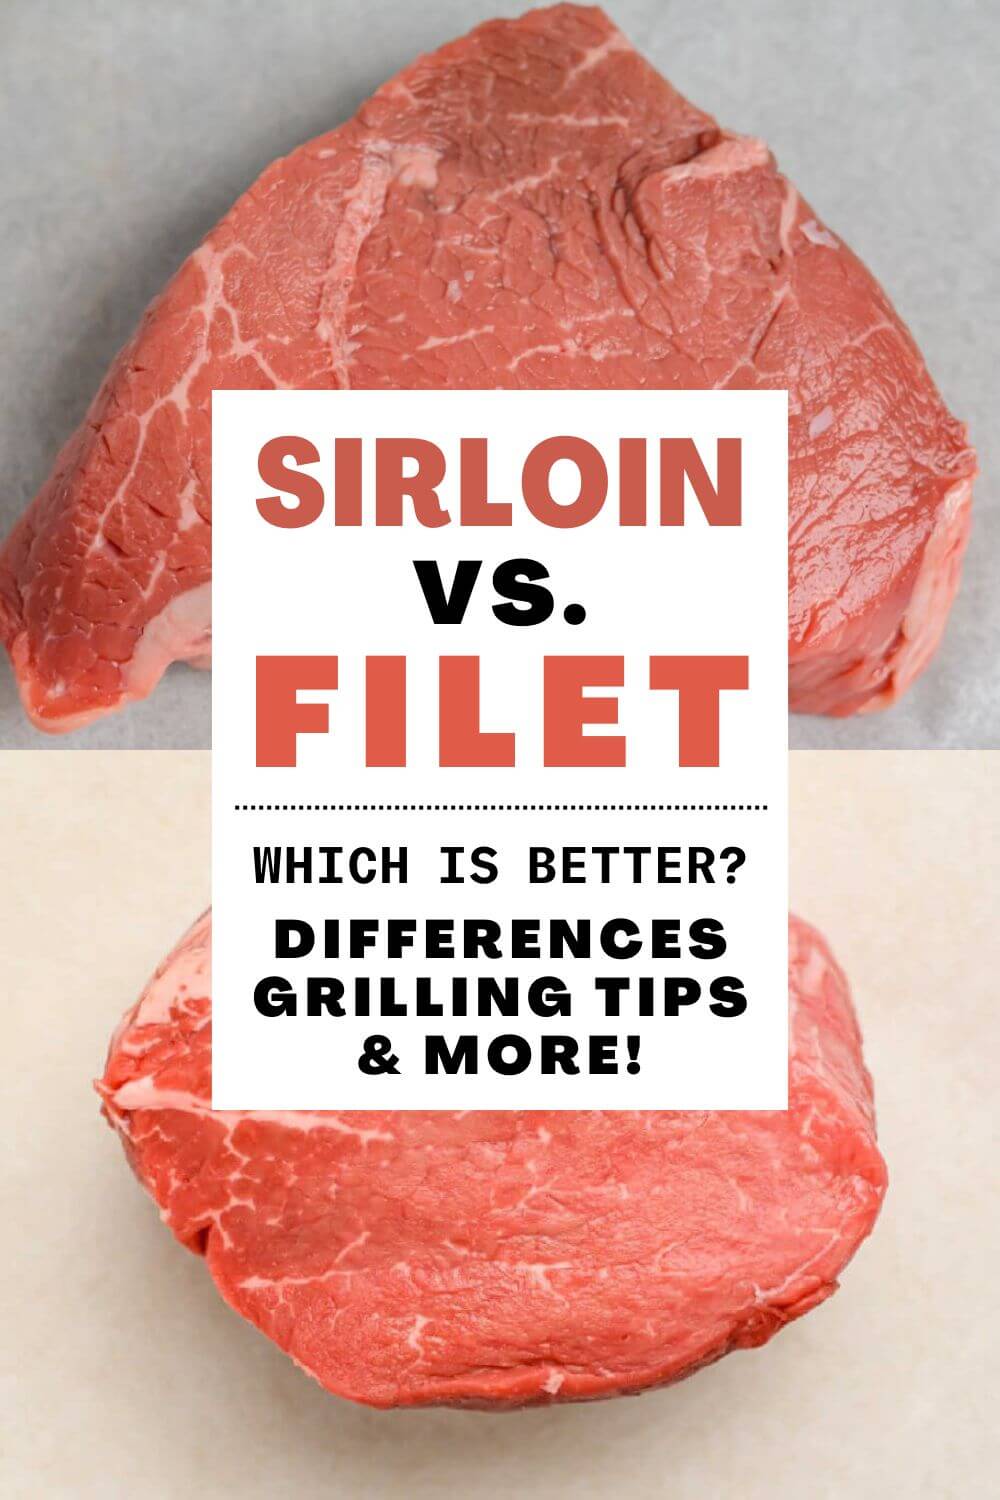 Sirloin vs Filet - Differences & Cooking Tips